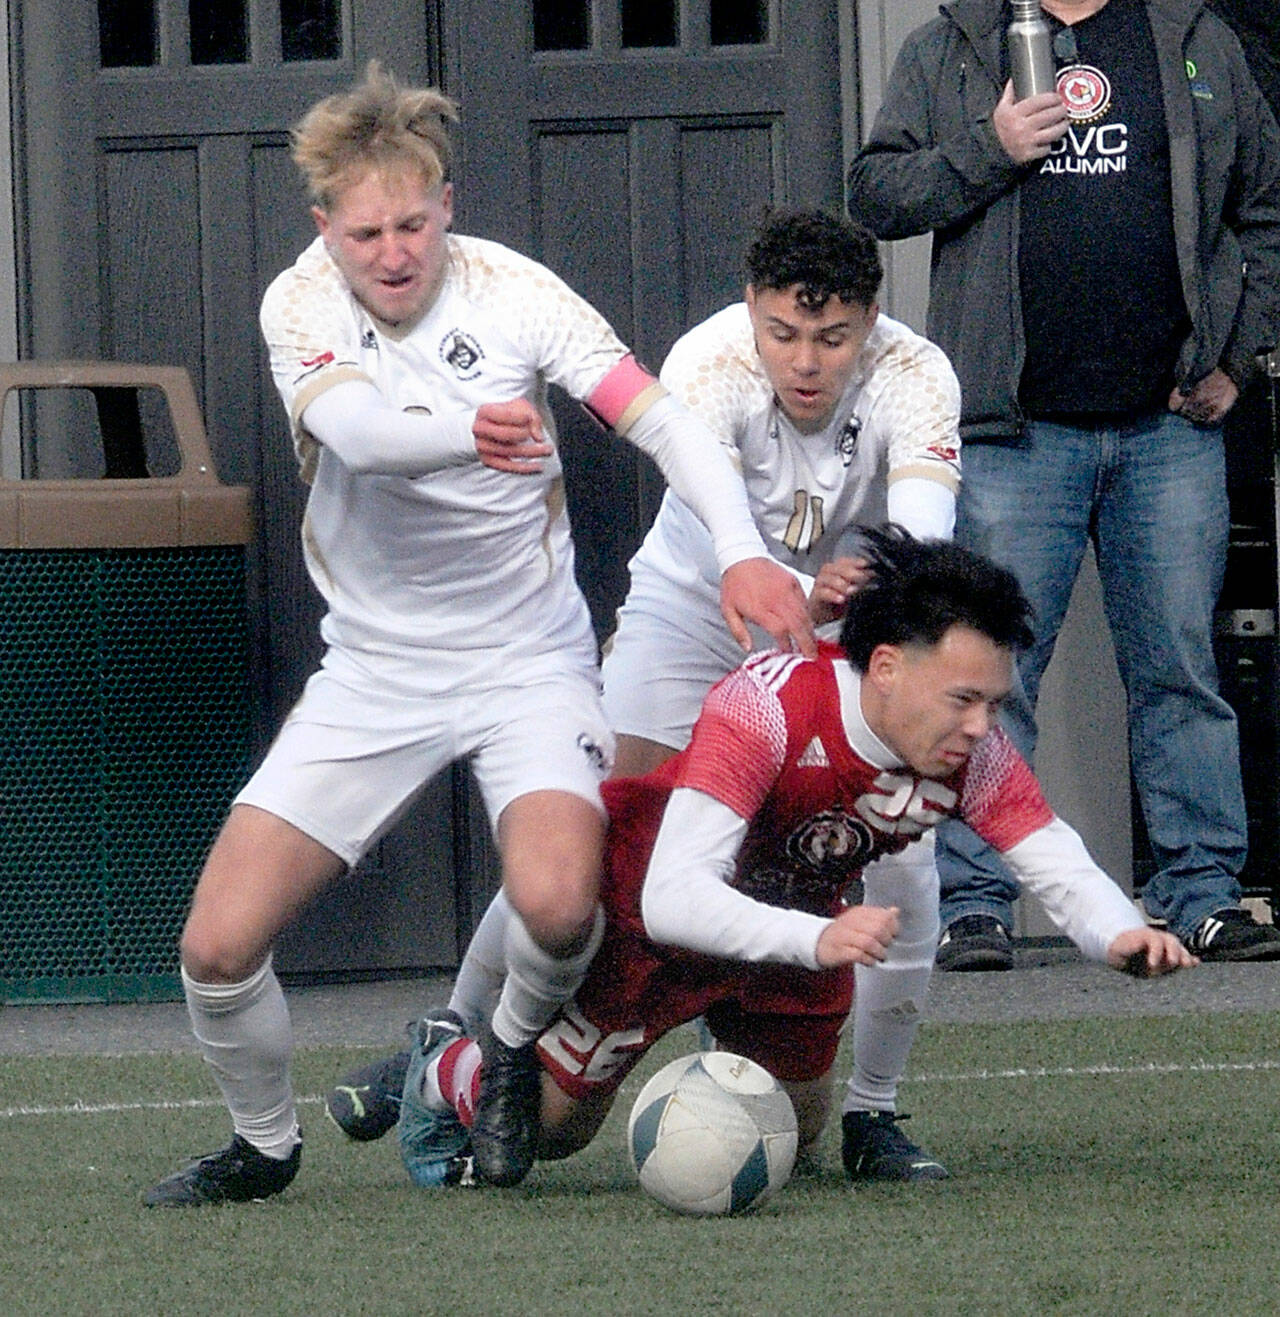 Peninsula’s Tim Deser, left, and teammate Alfonso Santos de Cruz battle with Skagit Valley’s Oscar Ibarra for a loose ball Saturday in Port Angeles. The Pirates won the physical game 2-1. (Keith Thorpe/Peninsula Daily News)